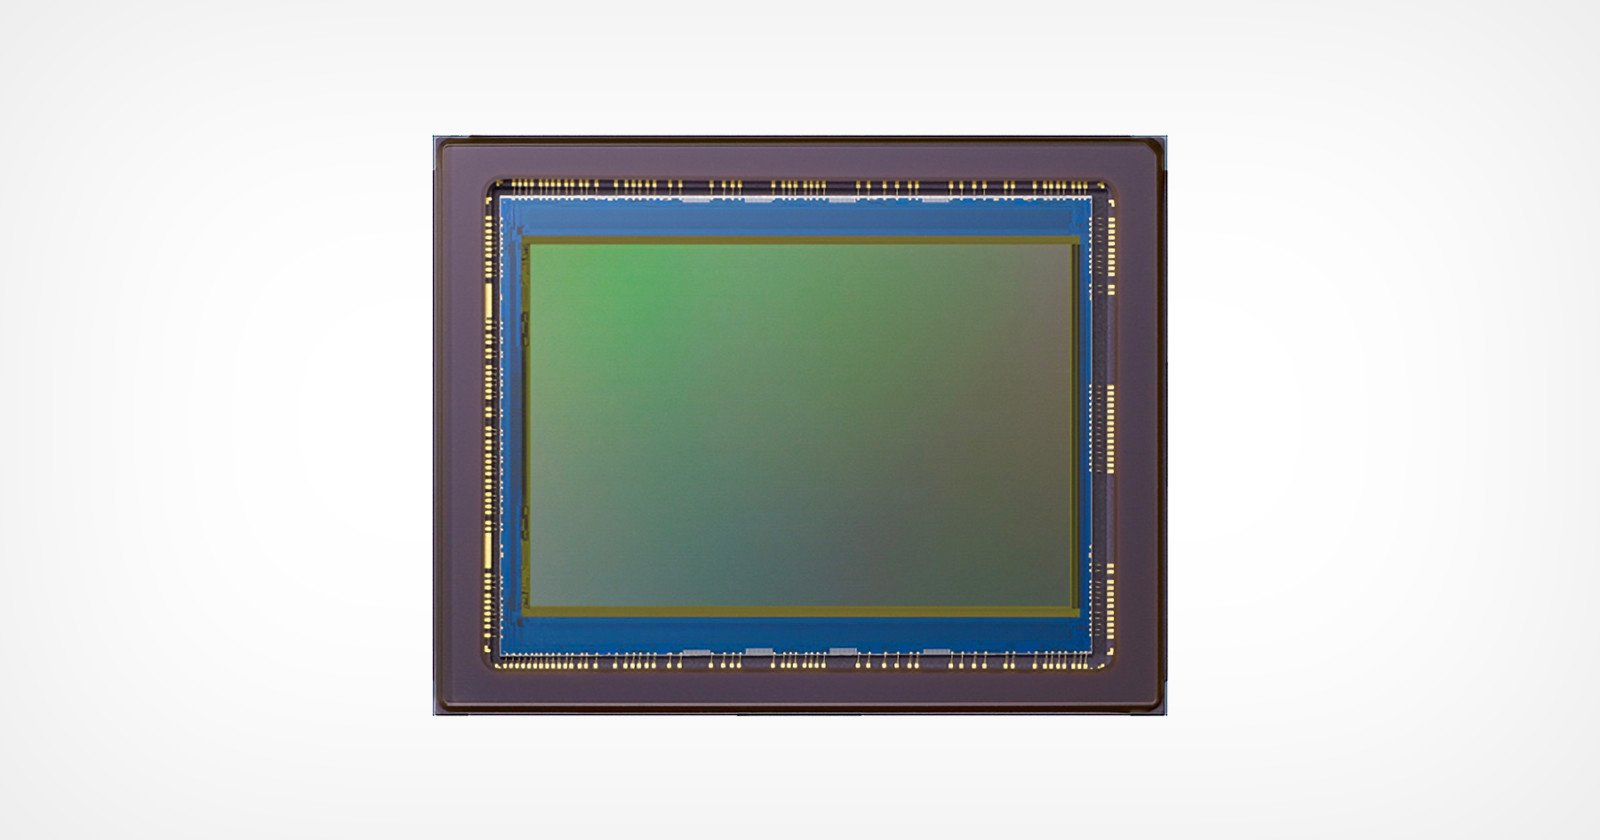 Sony Explains How Its Groundbreaking 2-Layer CMOS Sensor Was Made